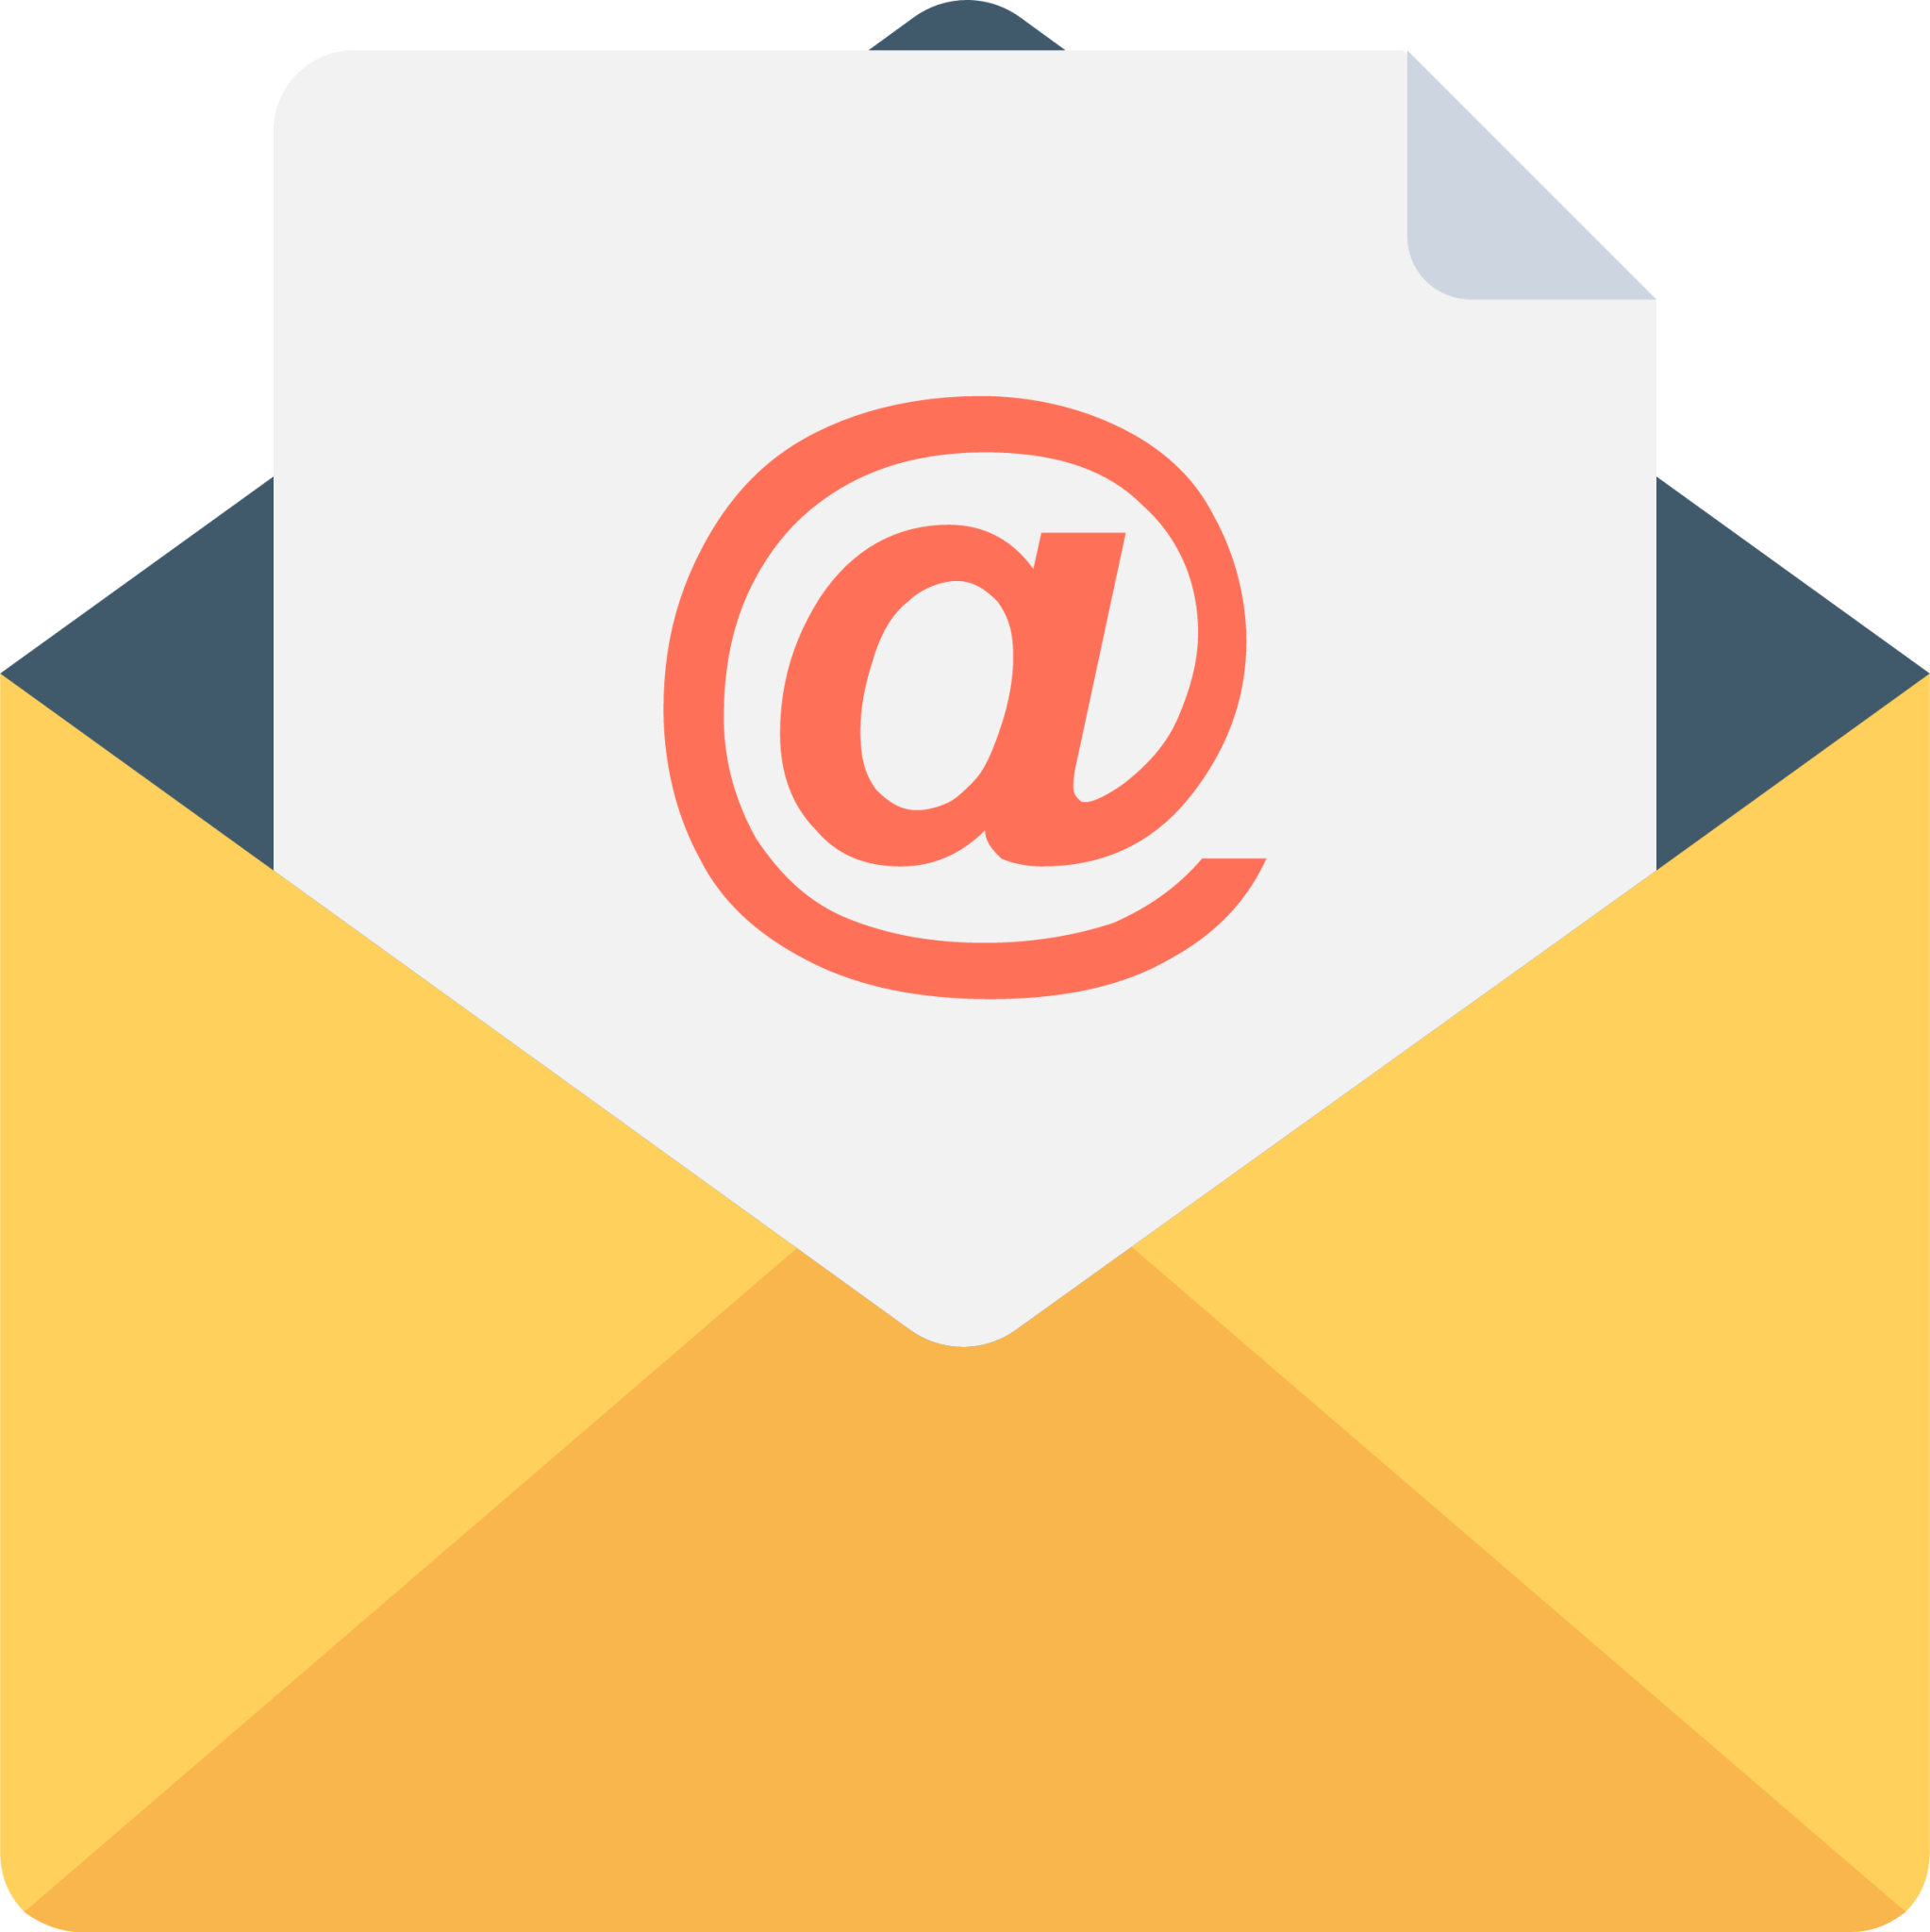 email 1 icon